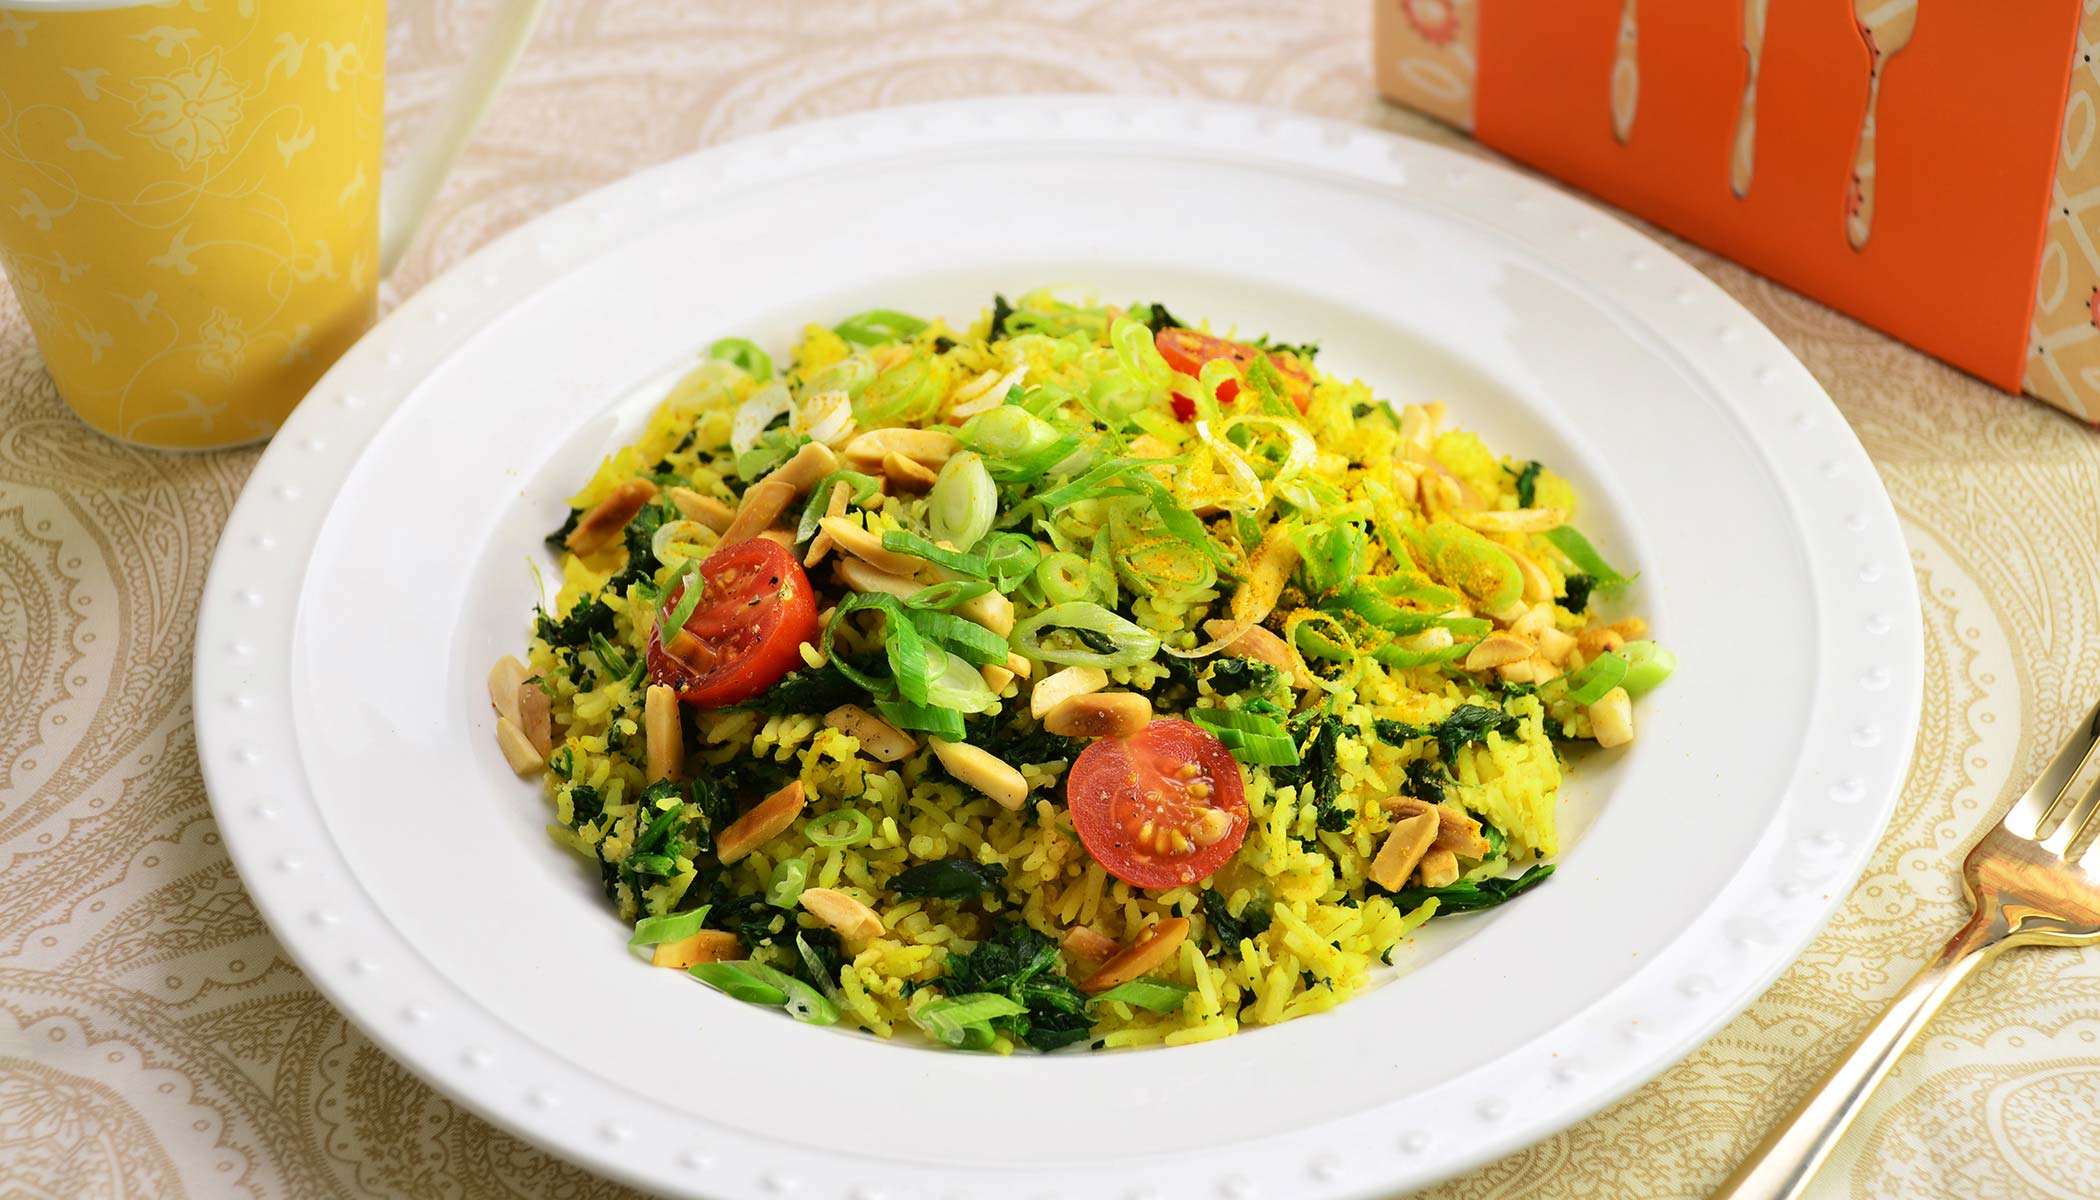 Zojirushi Recipe – Spicy Basmati Rice with Lentils and Spinach